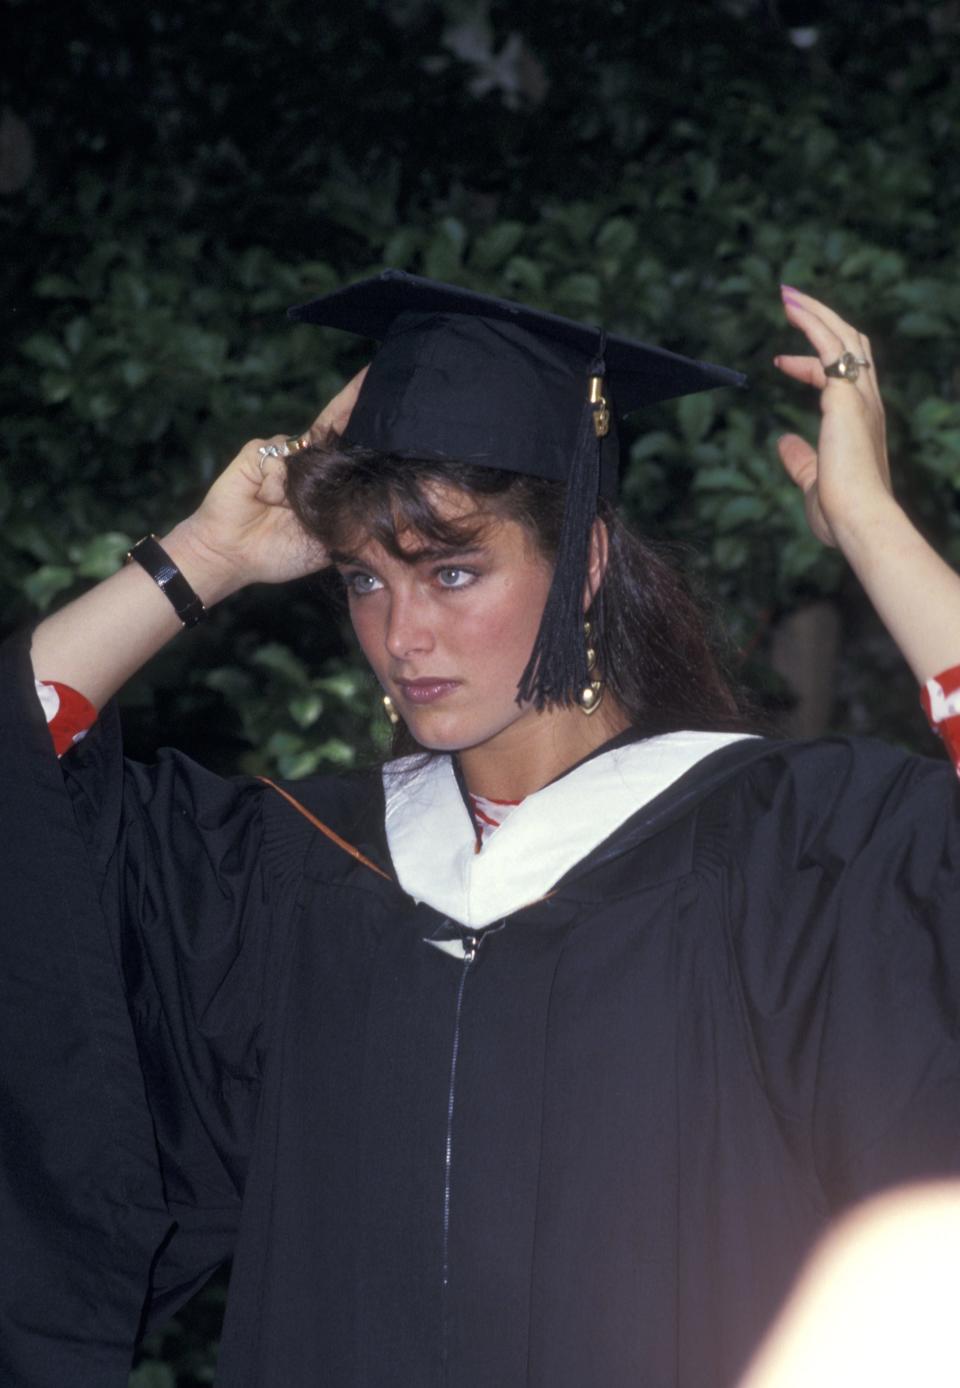 Brooke Shields' during her graduation at Princeton University in 1987.